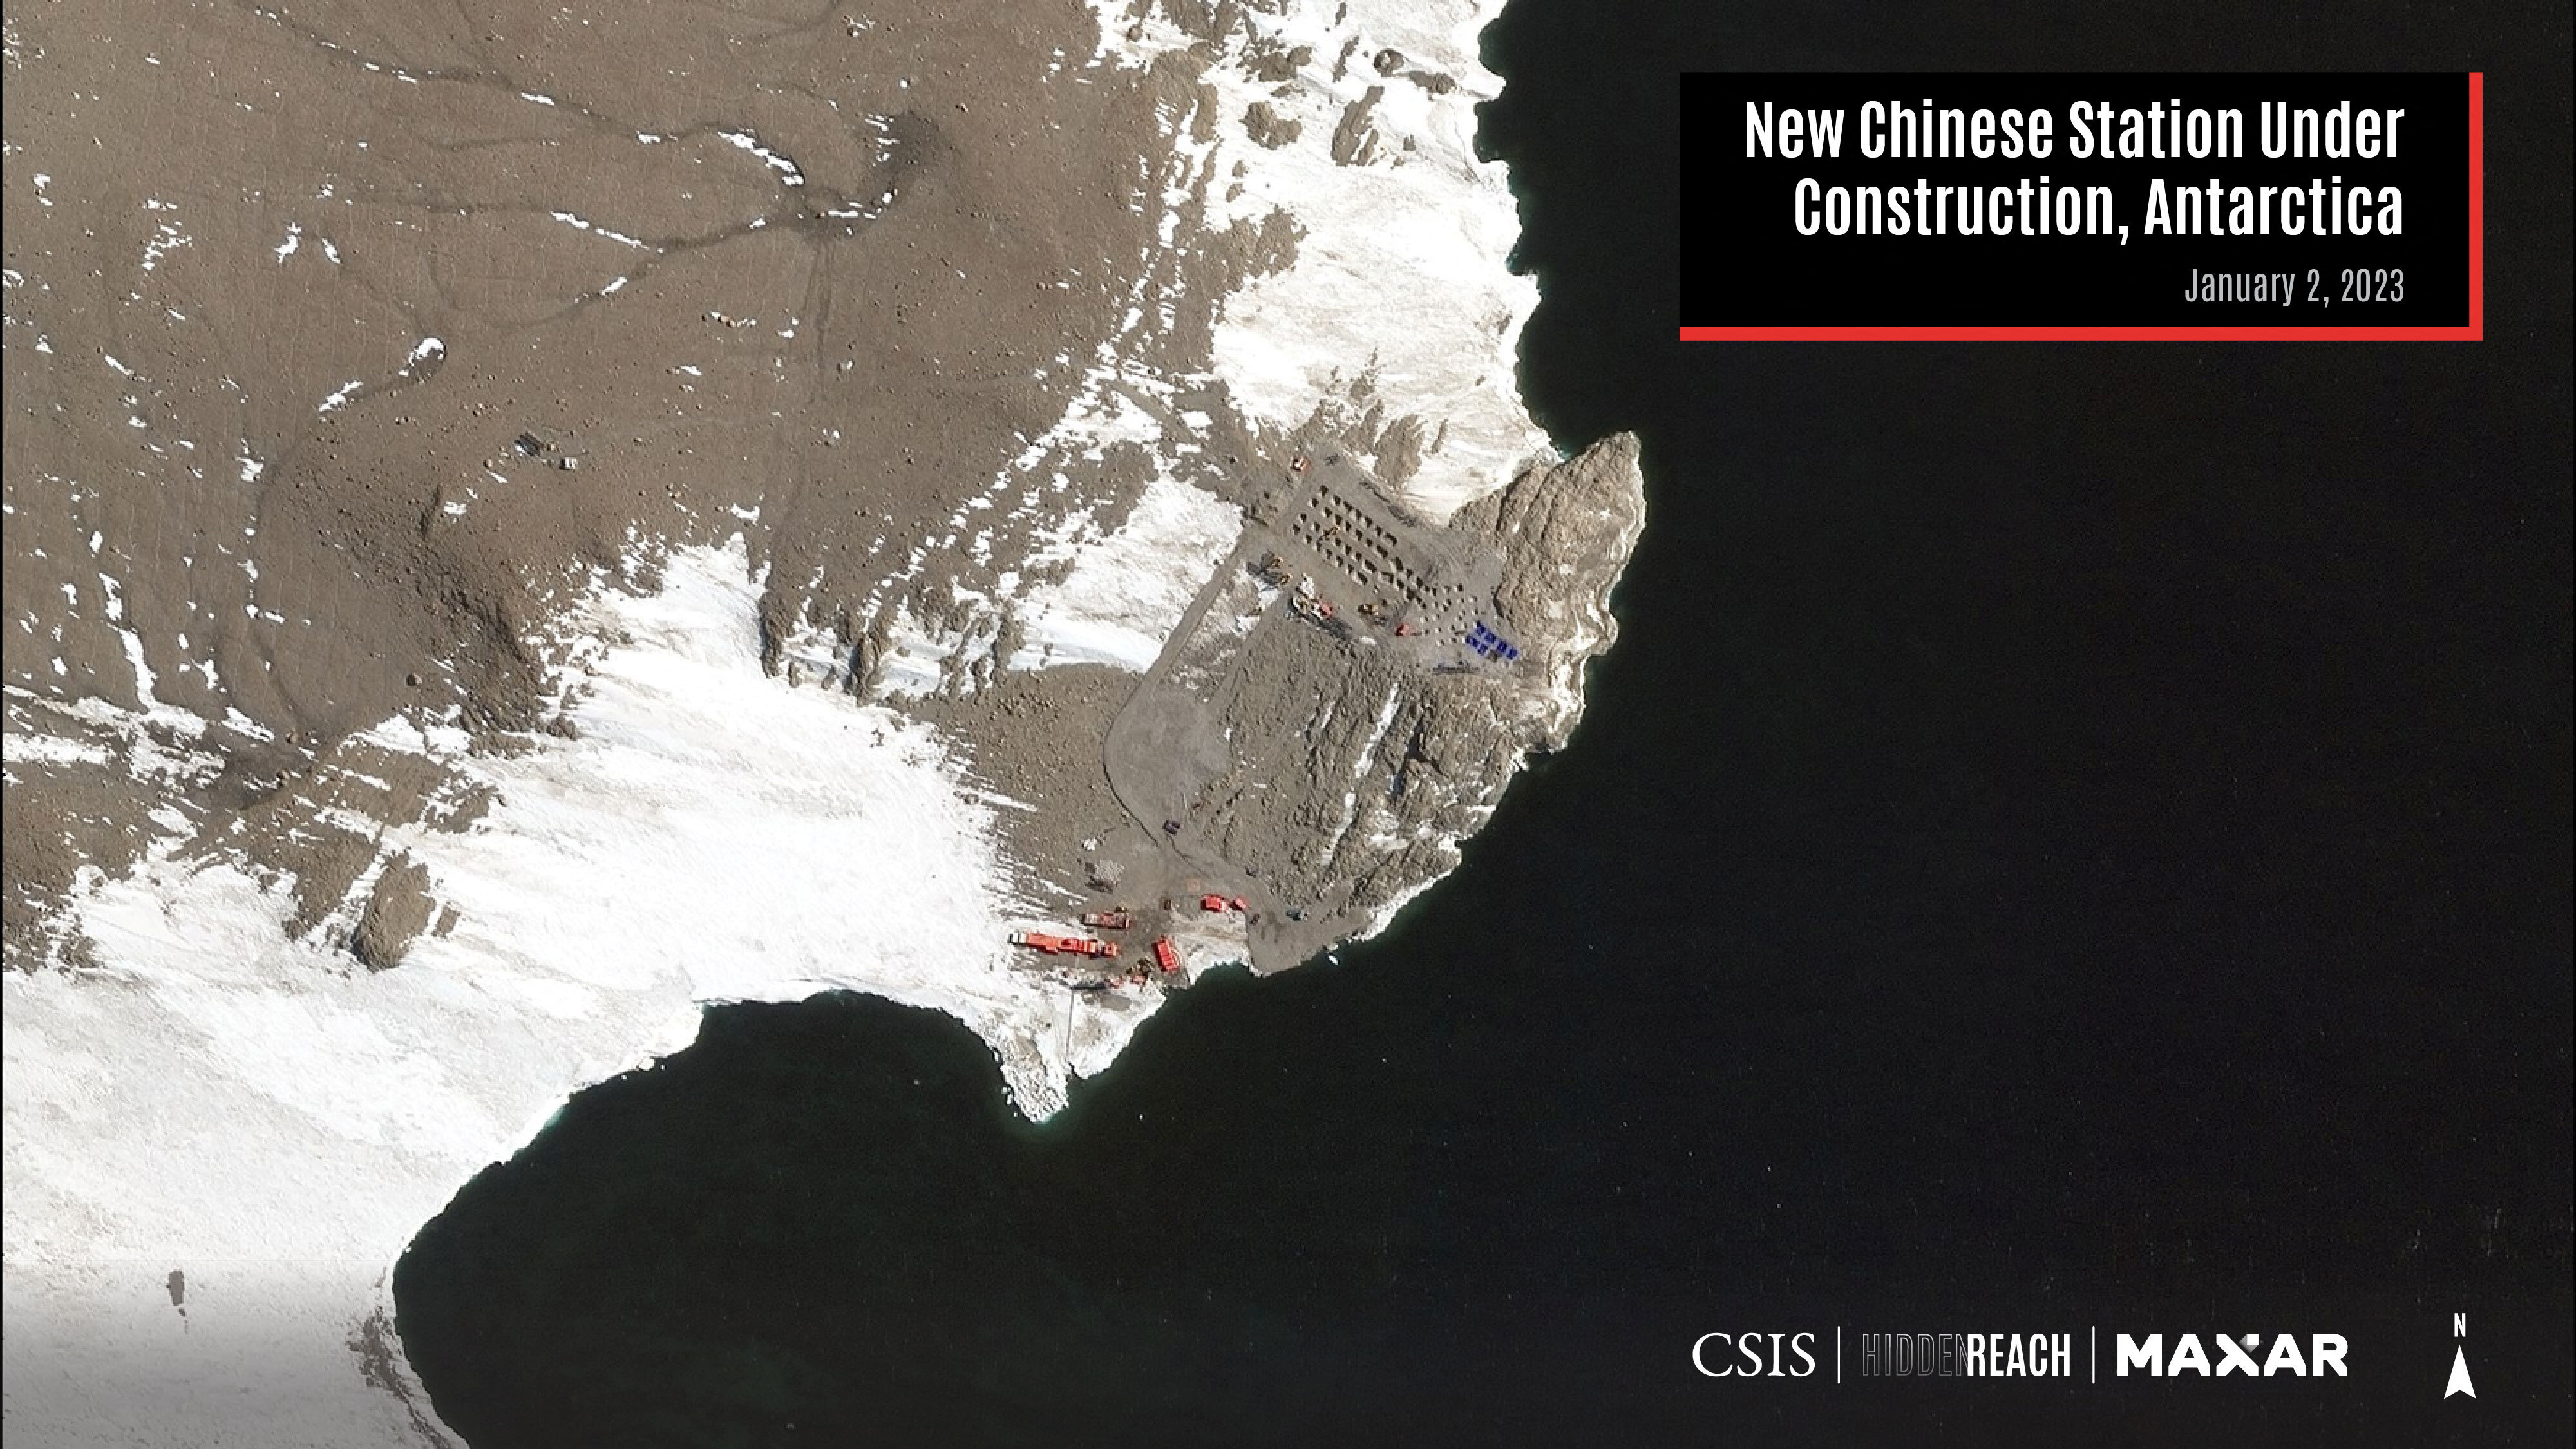 A satellite view shows the new Chinese station under construction, on Inexpressible Island, Antarctica